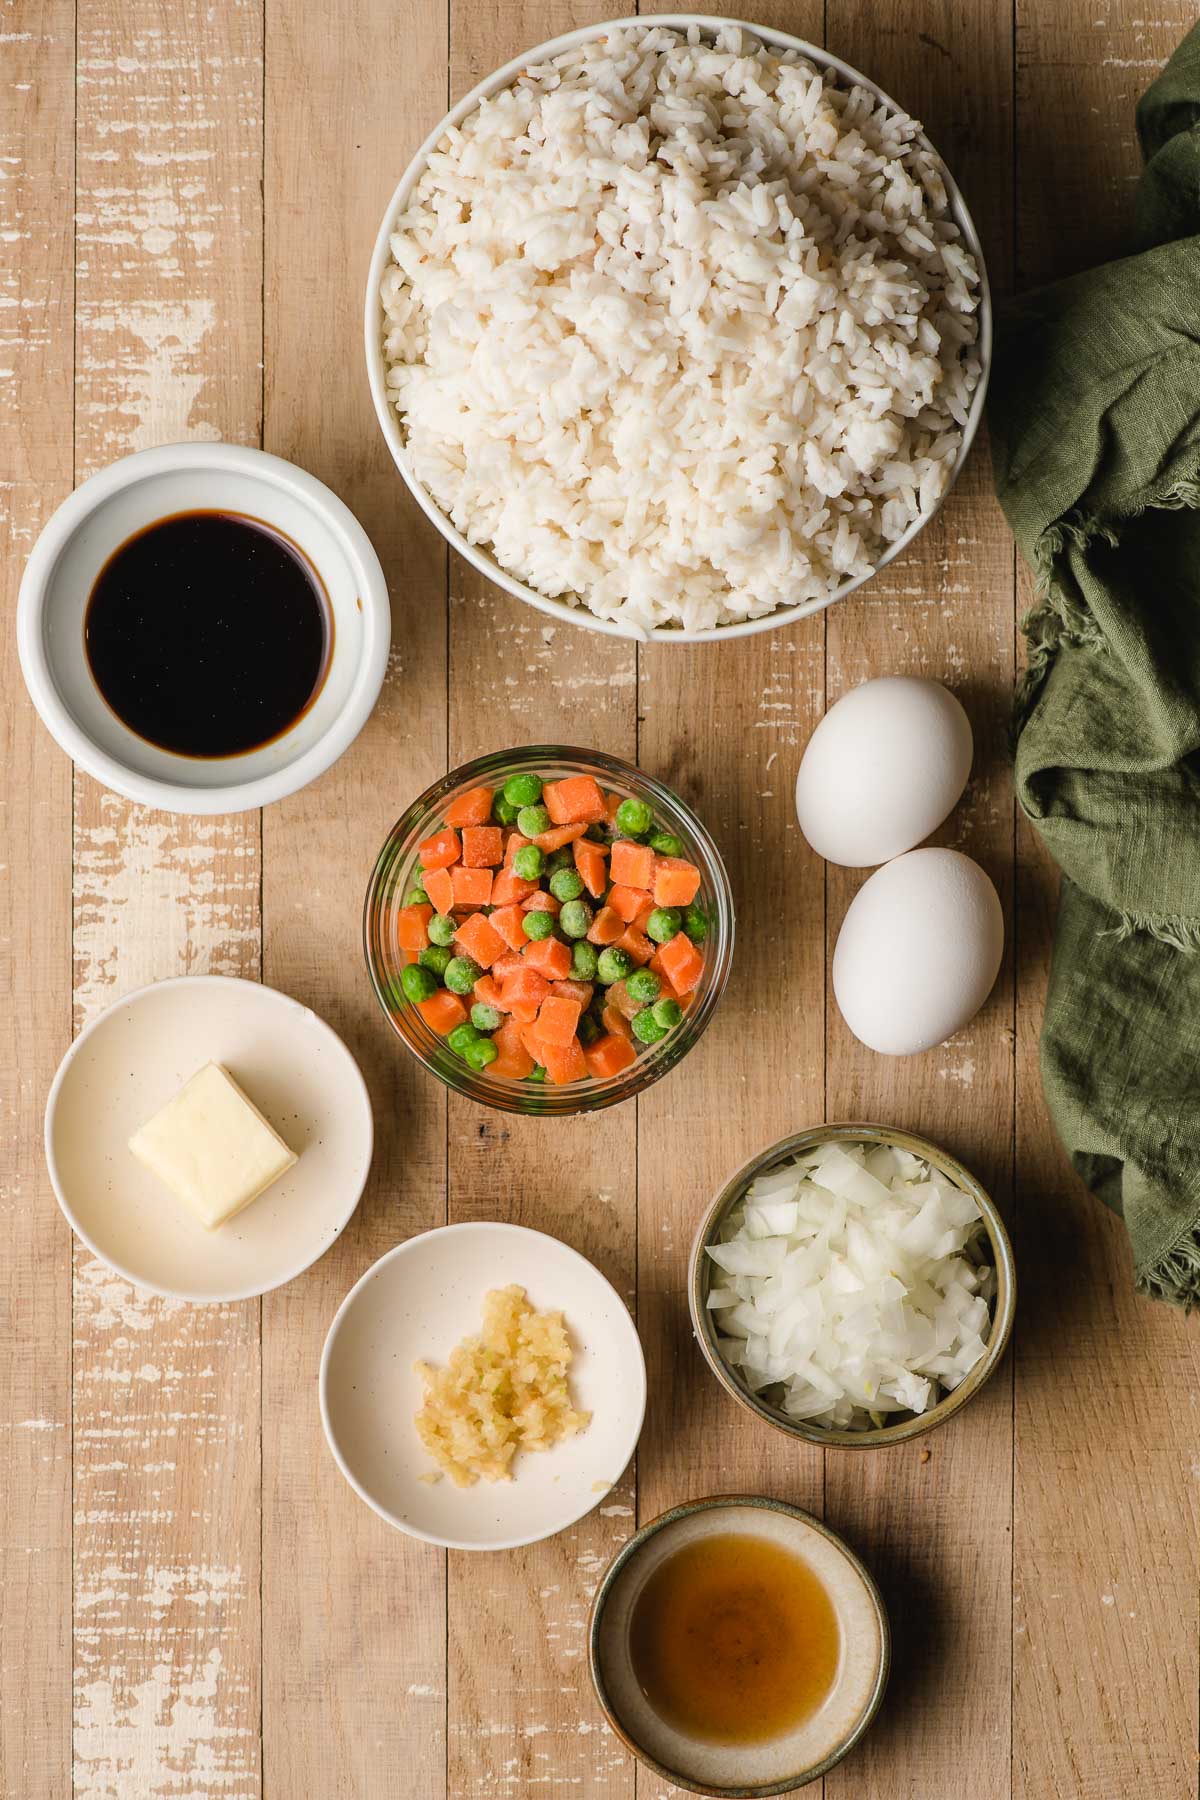 Several bowls filled with white rice, peas and carrots, butter, garlic, soy sauce, onion, and eggs.